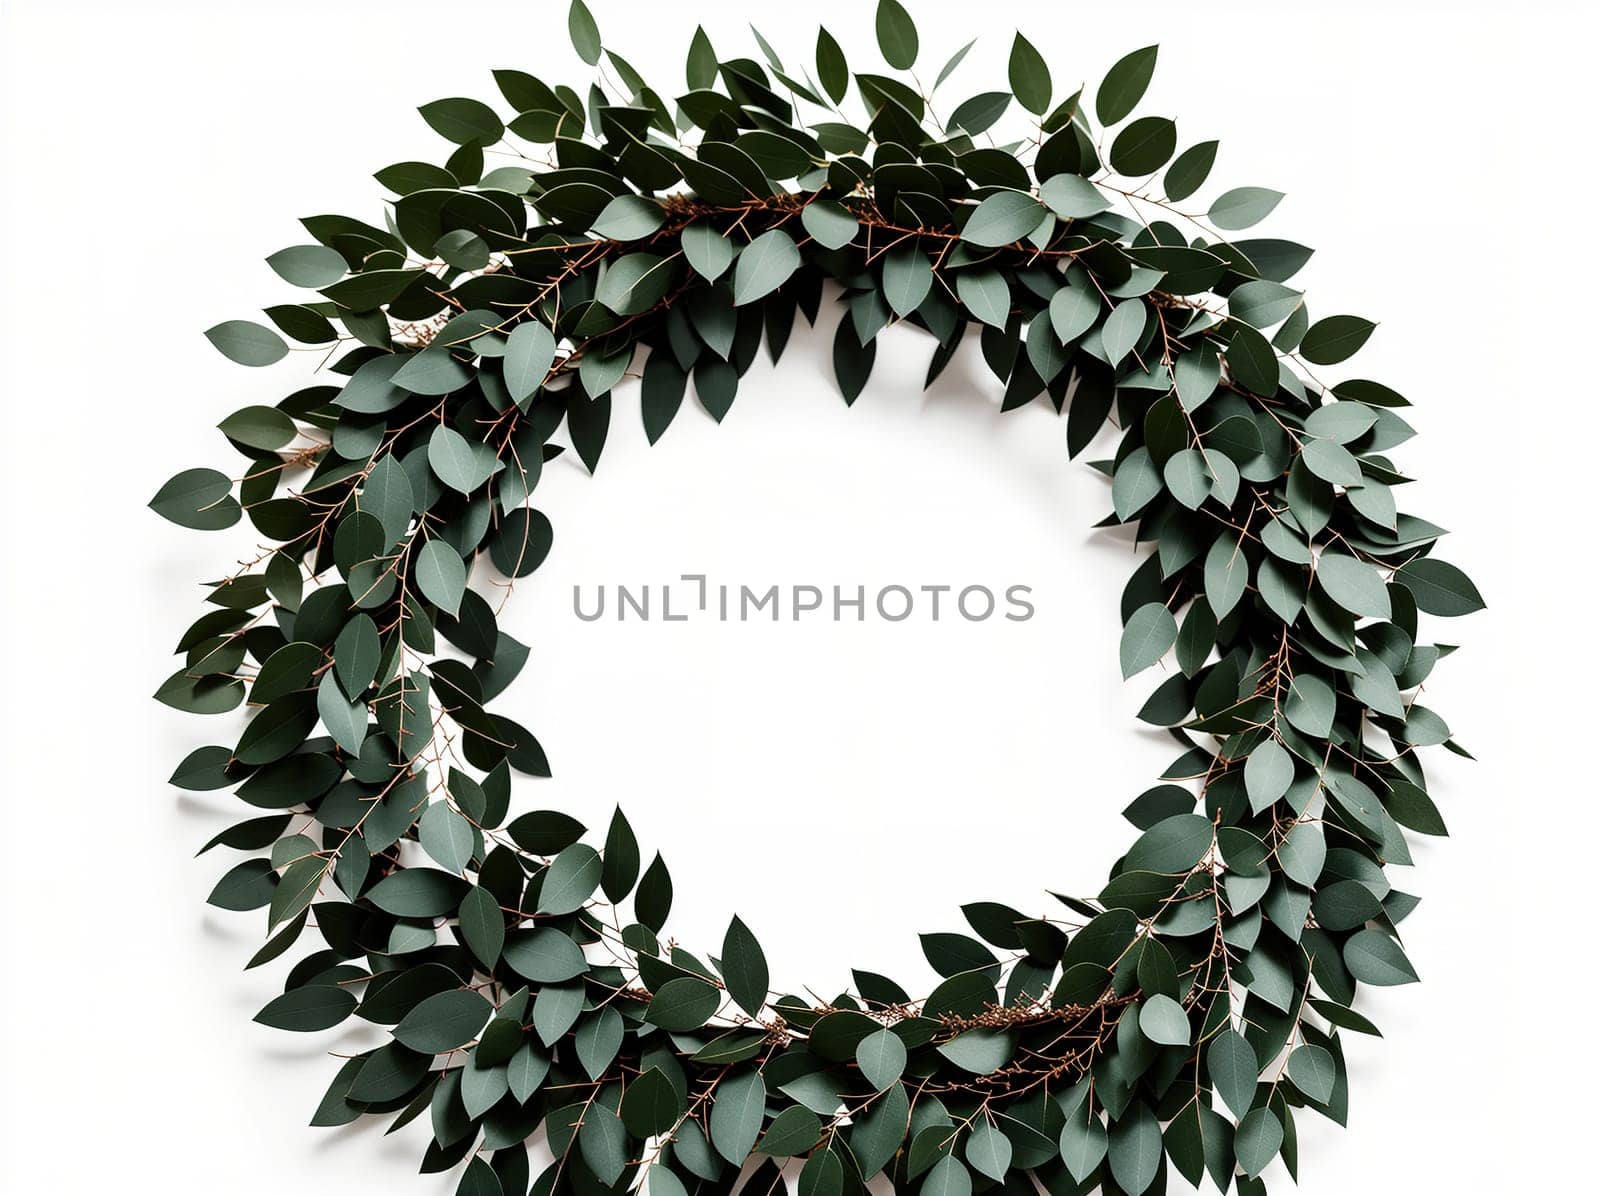 The image is a wreath made of leaves, hanging on a white background.